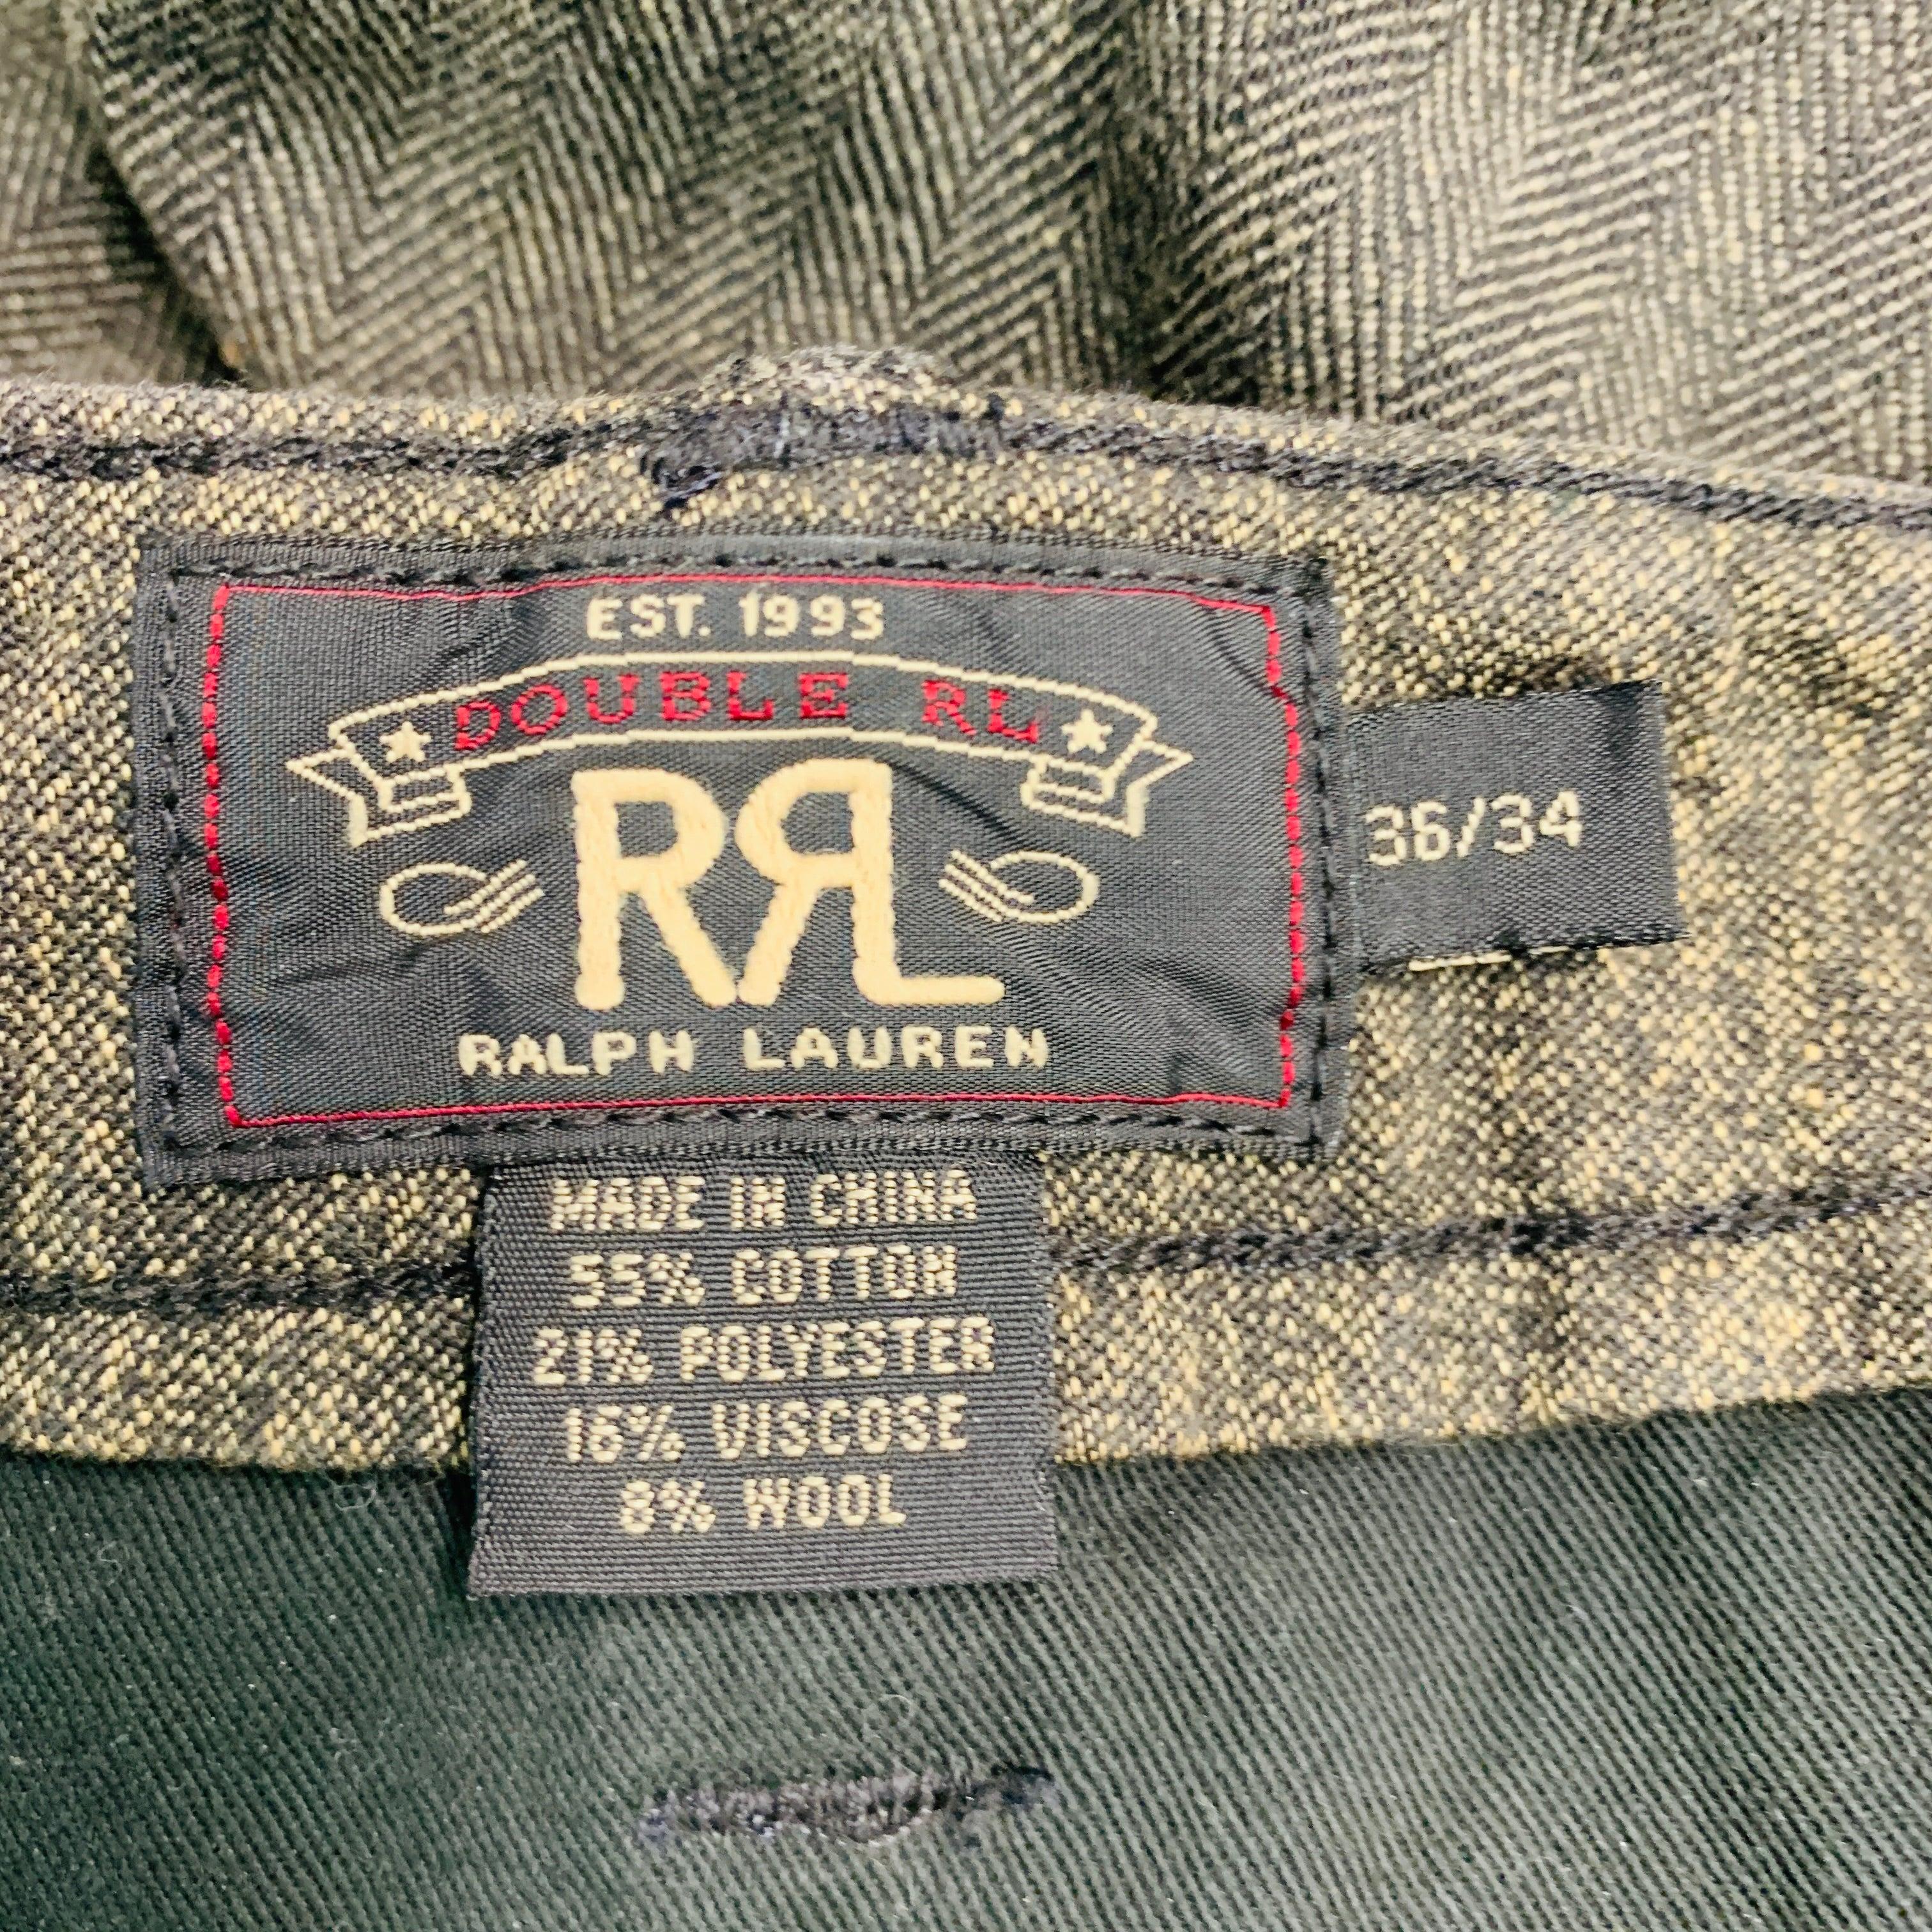 RRL by RALPH LAUREN Size 36 Grey Herringbone Cotton Blend Casual Pants In Excellent Condition For Sale In San Francisco, CA